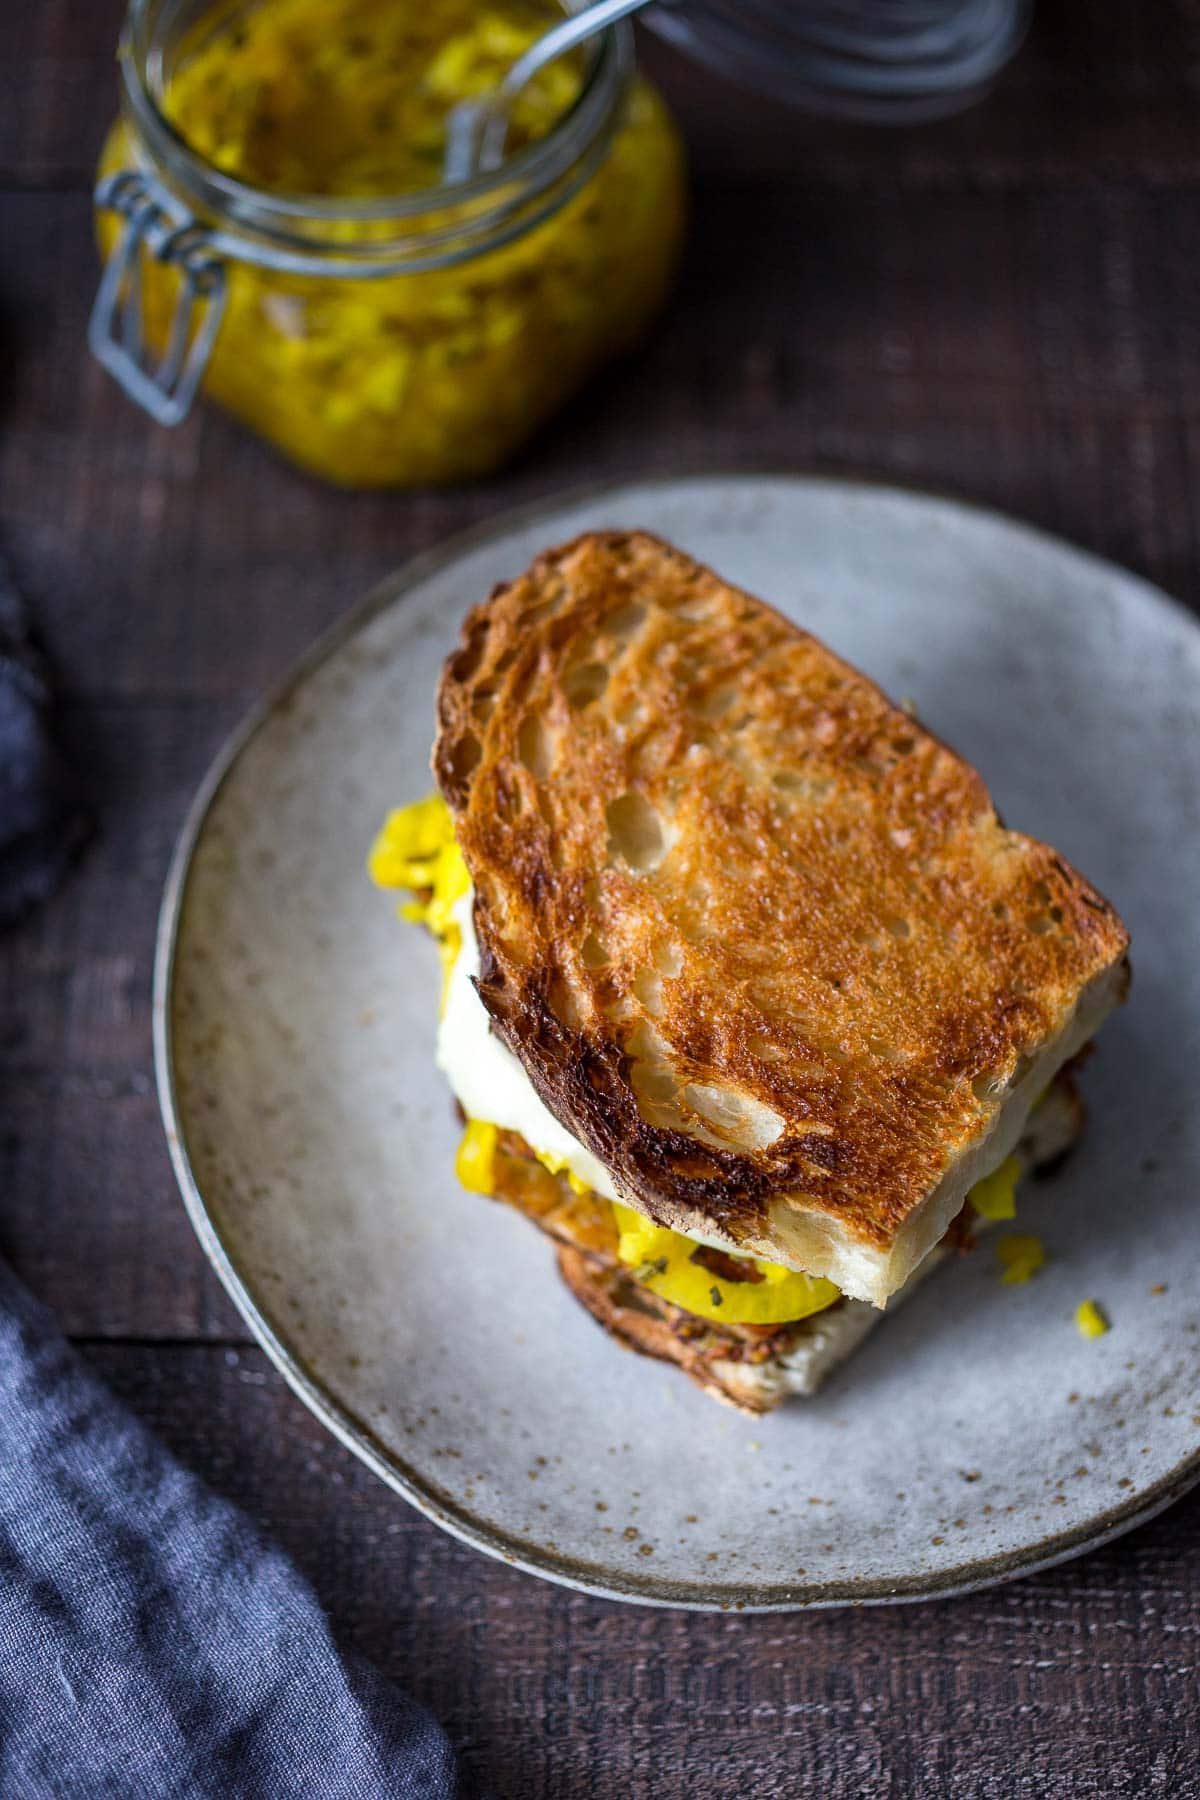 This toasty Tempeh Reuben Sandwich is so delicious! Made with melty cheese, flavorful seared tempeh, and Sauerkraut, keep it vegetarian or use vegan cheese for a vegan reuben! 